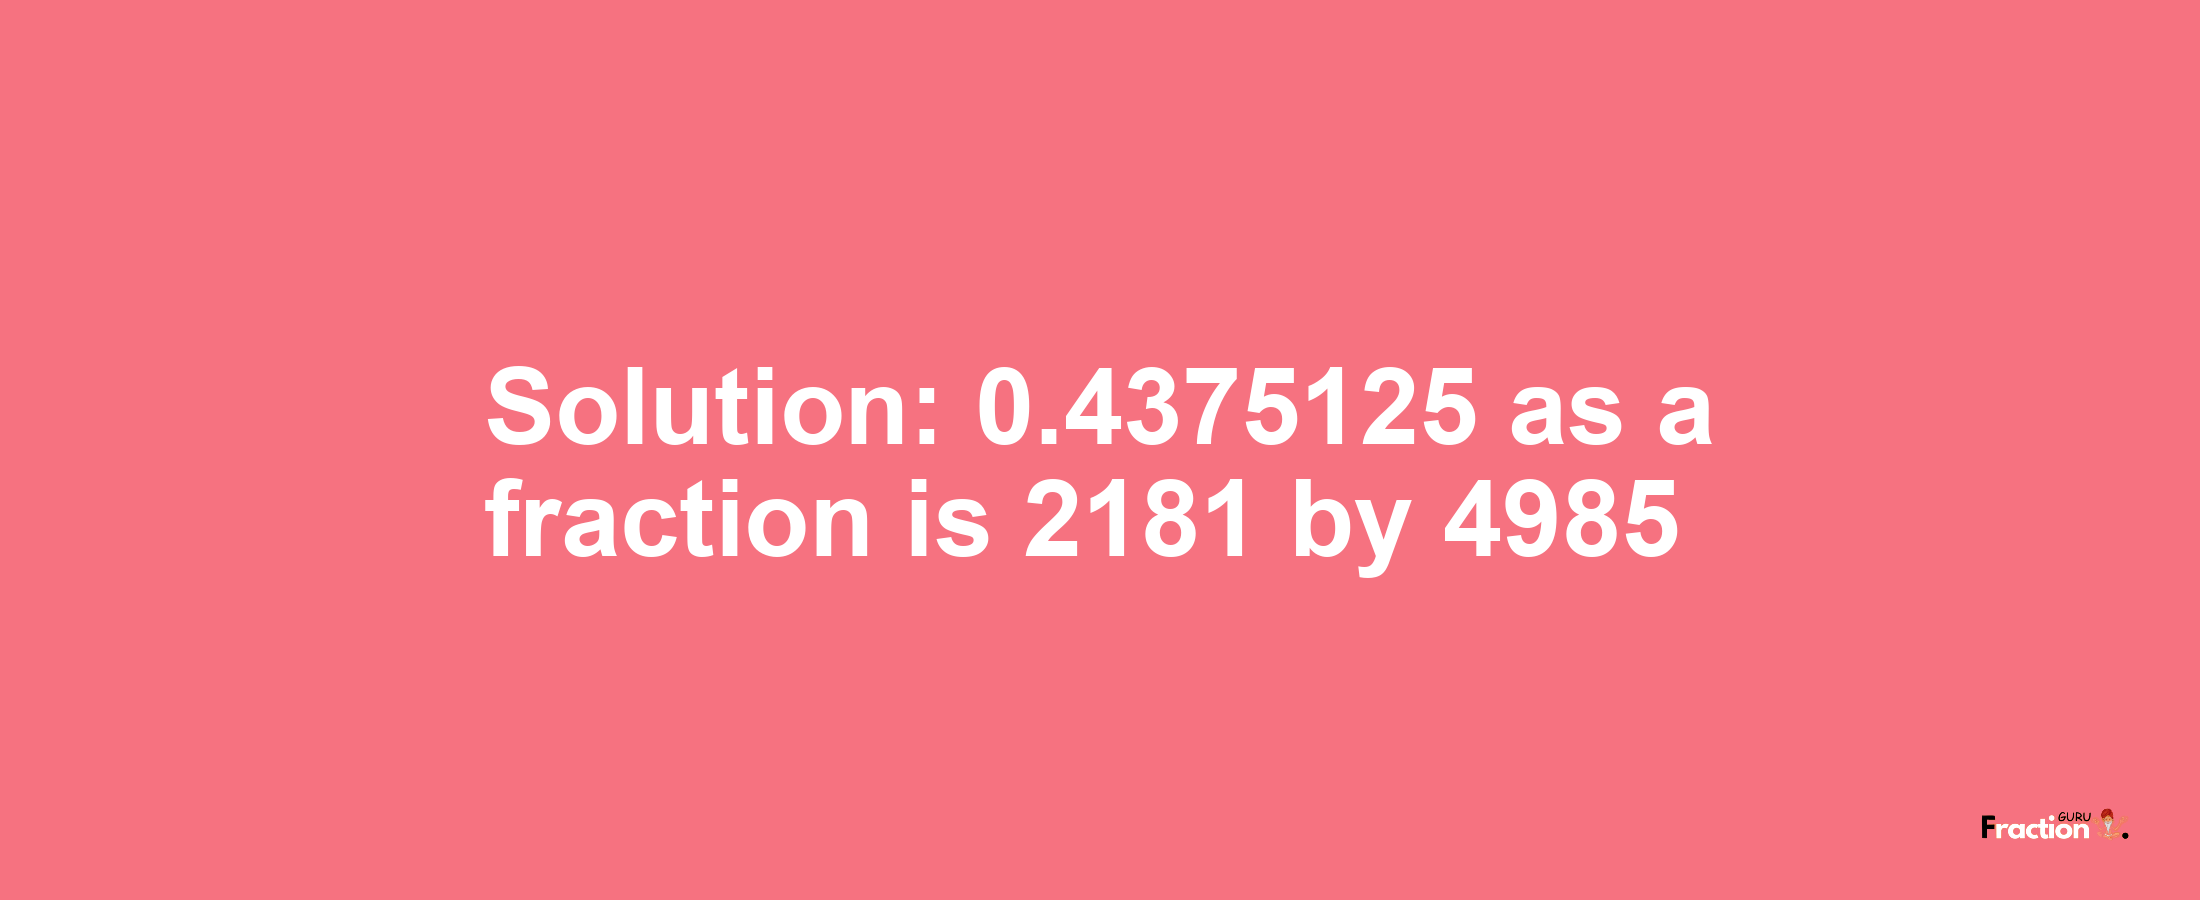 Solution:0.4375125 as a fraction is 2181/4985